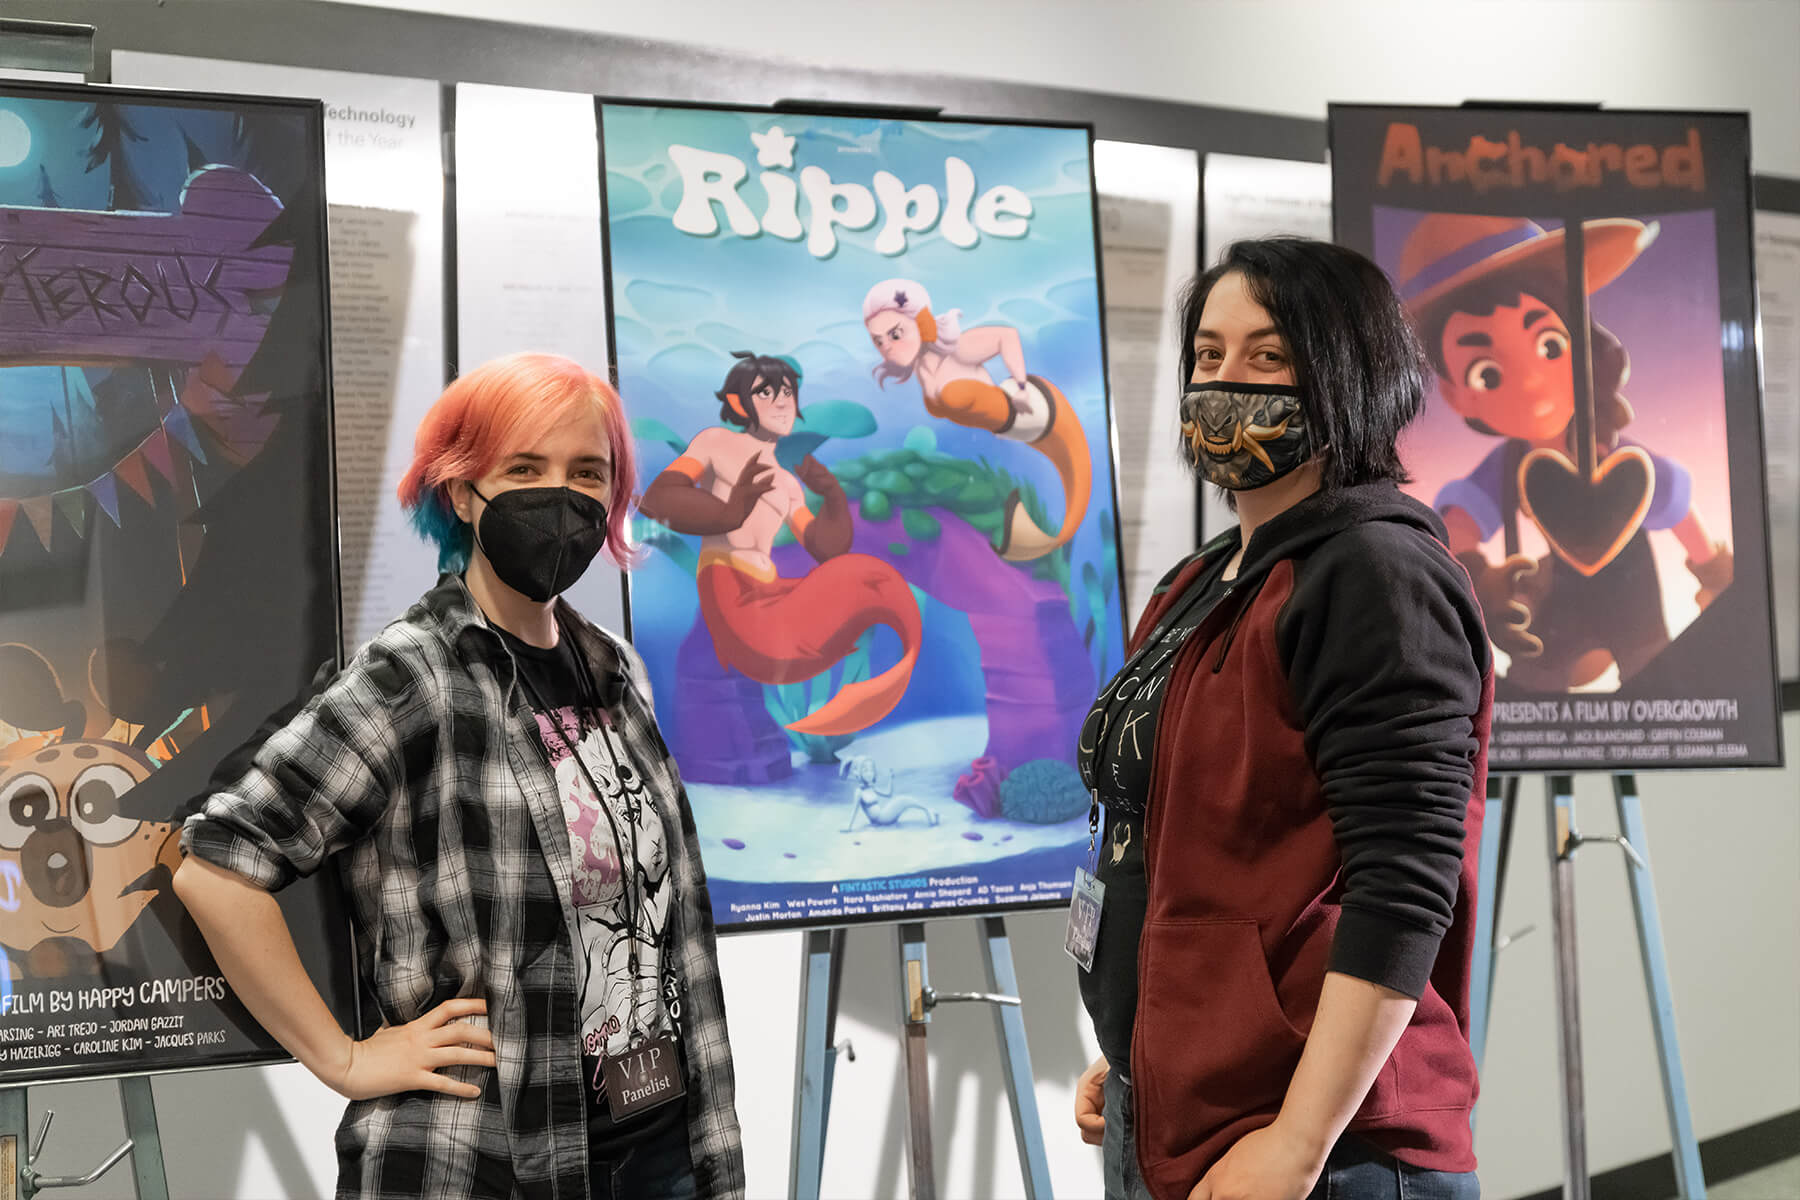 Two students pose in front of the DigiPen Film Festival poster for their film, Ripple.